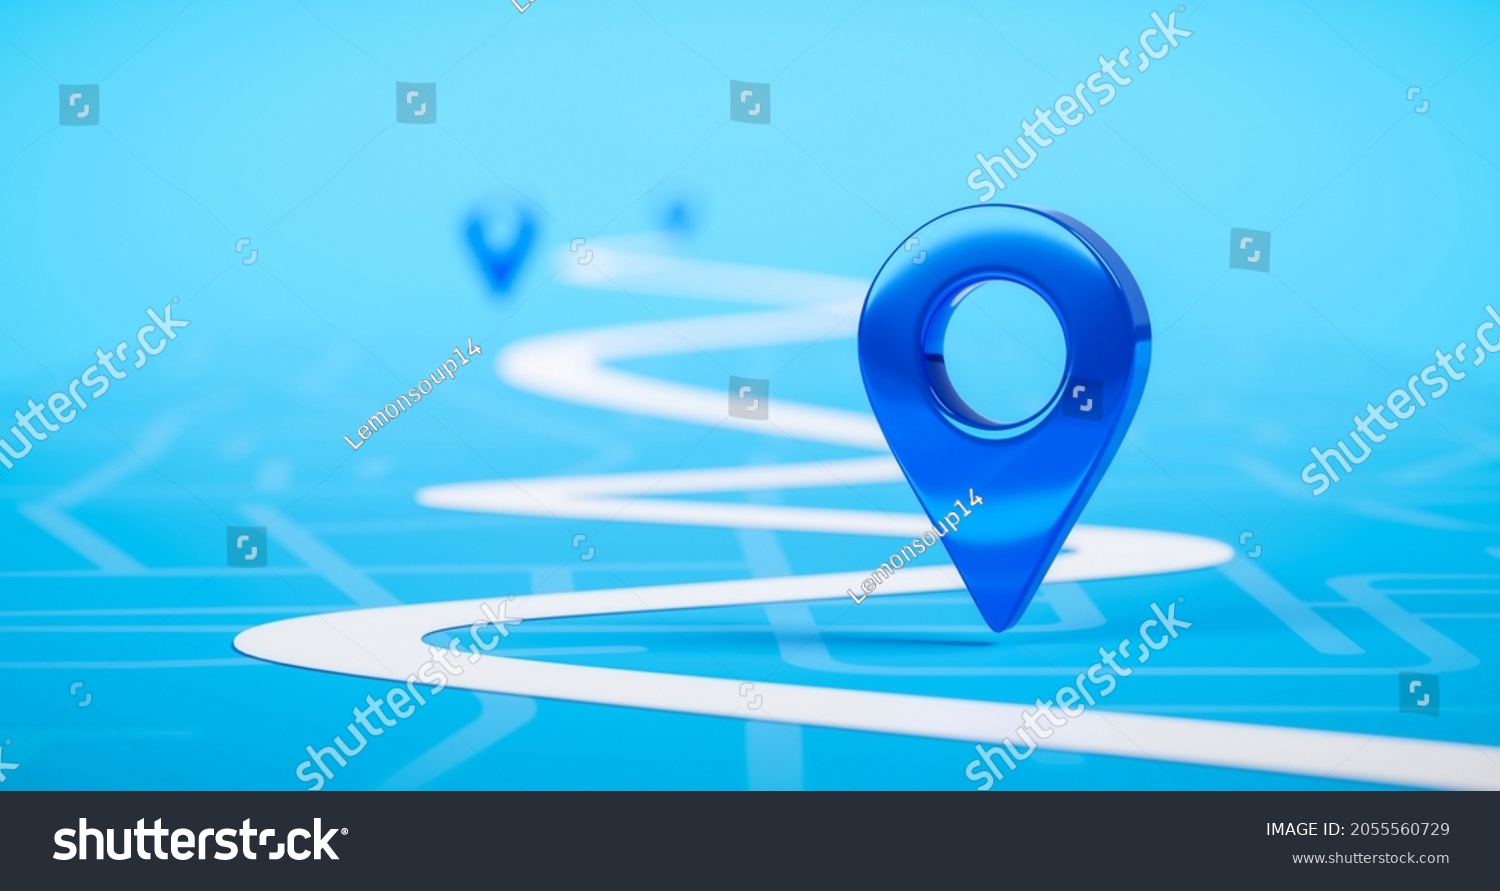 Stock Photo Road Map Of Blue Location Pin Icon Symbol Or Gps Travel Route Navigation Marker And Transportation 2055560729 